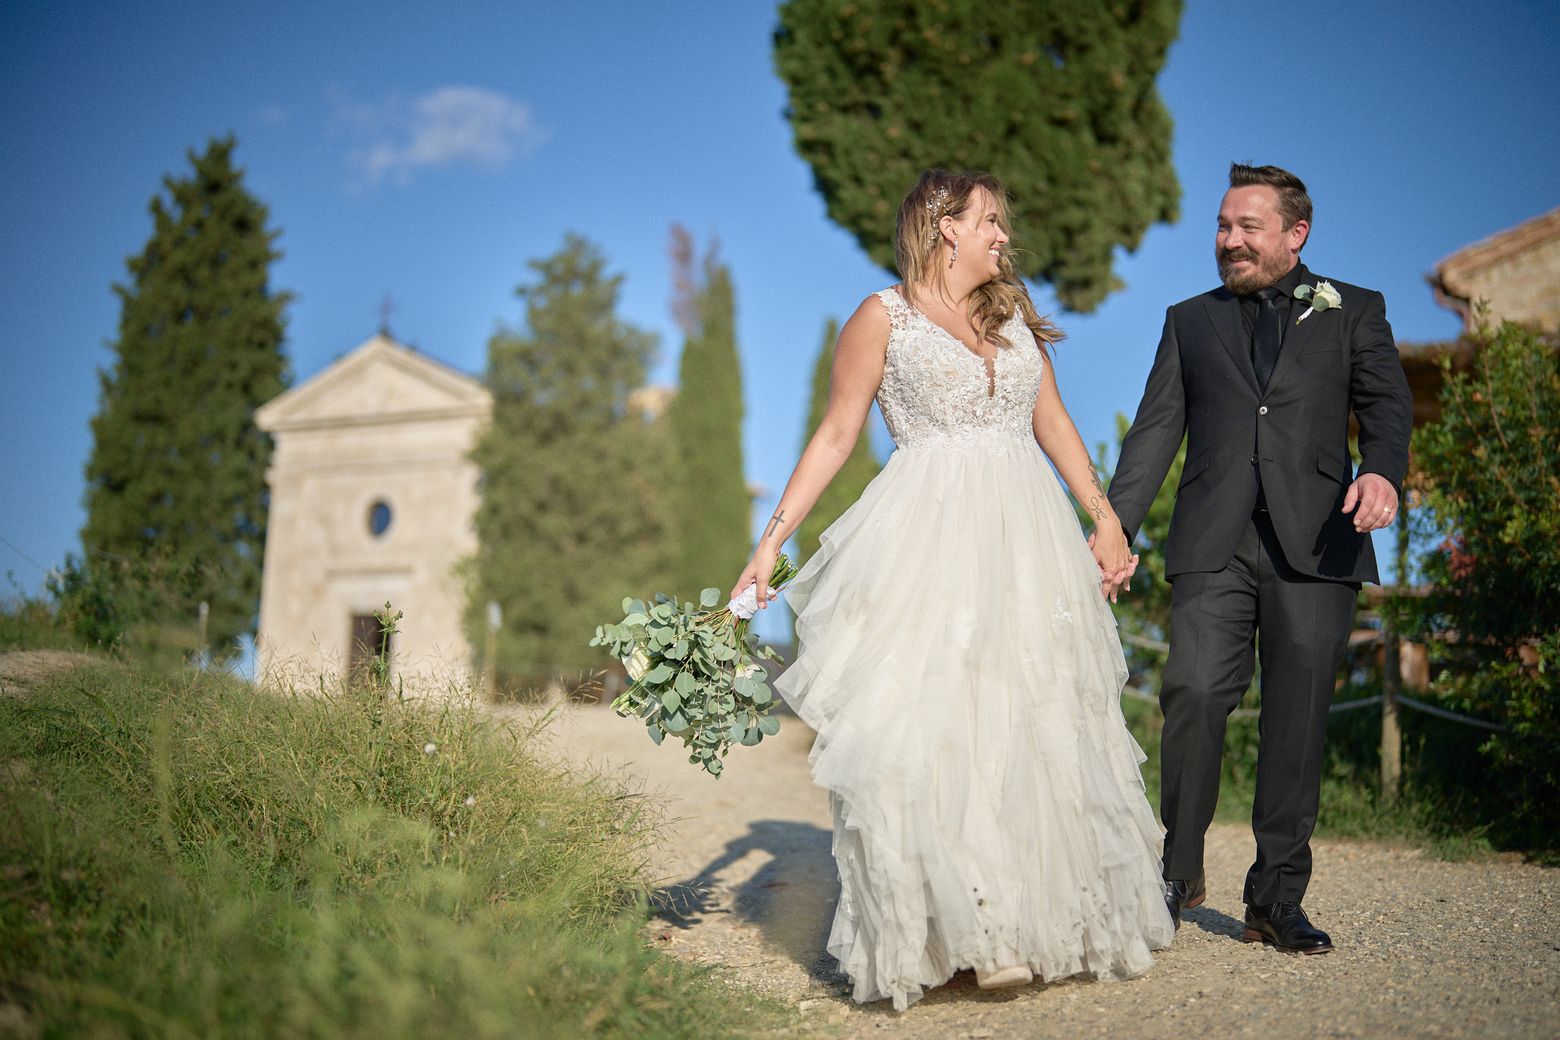 Outdoor elopement in Tuscany